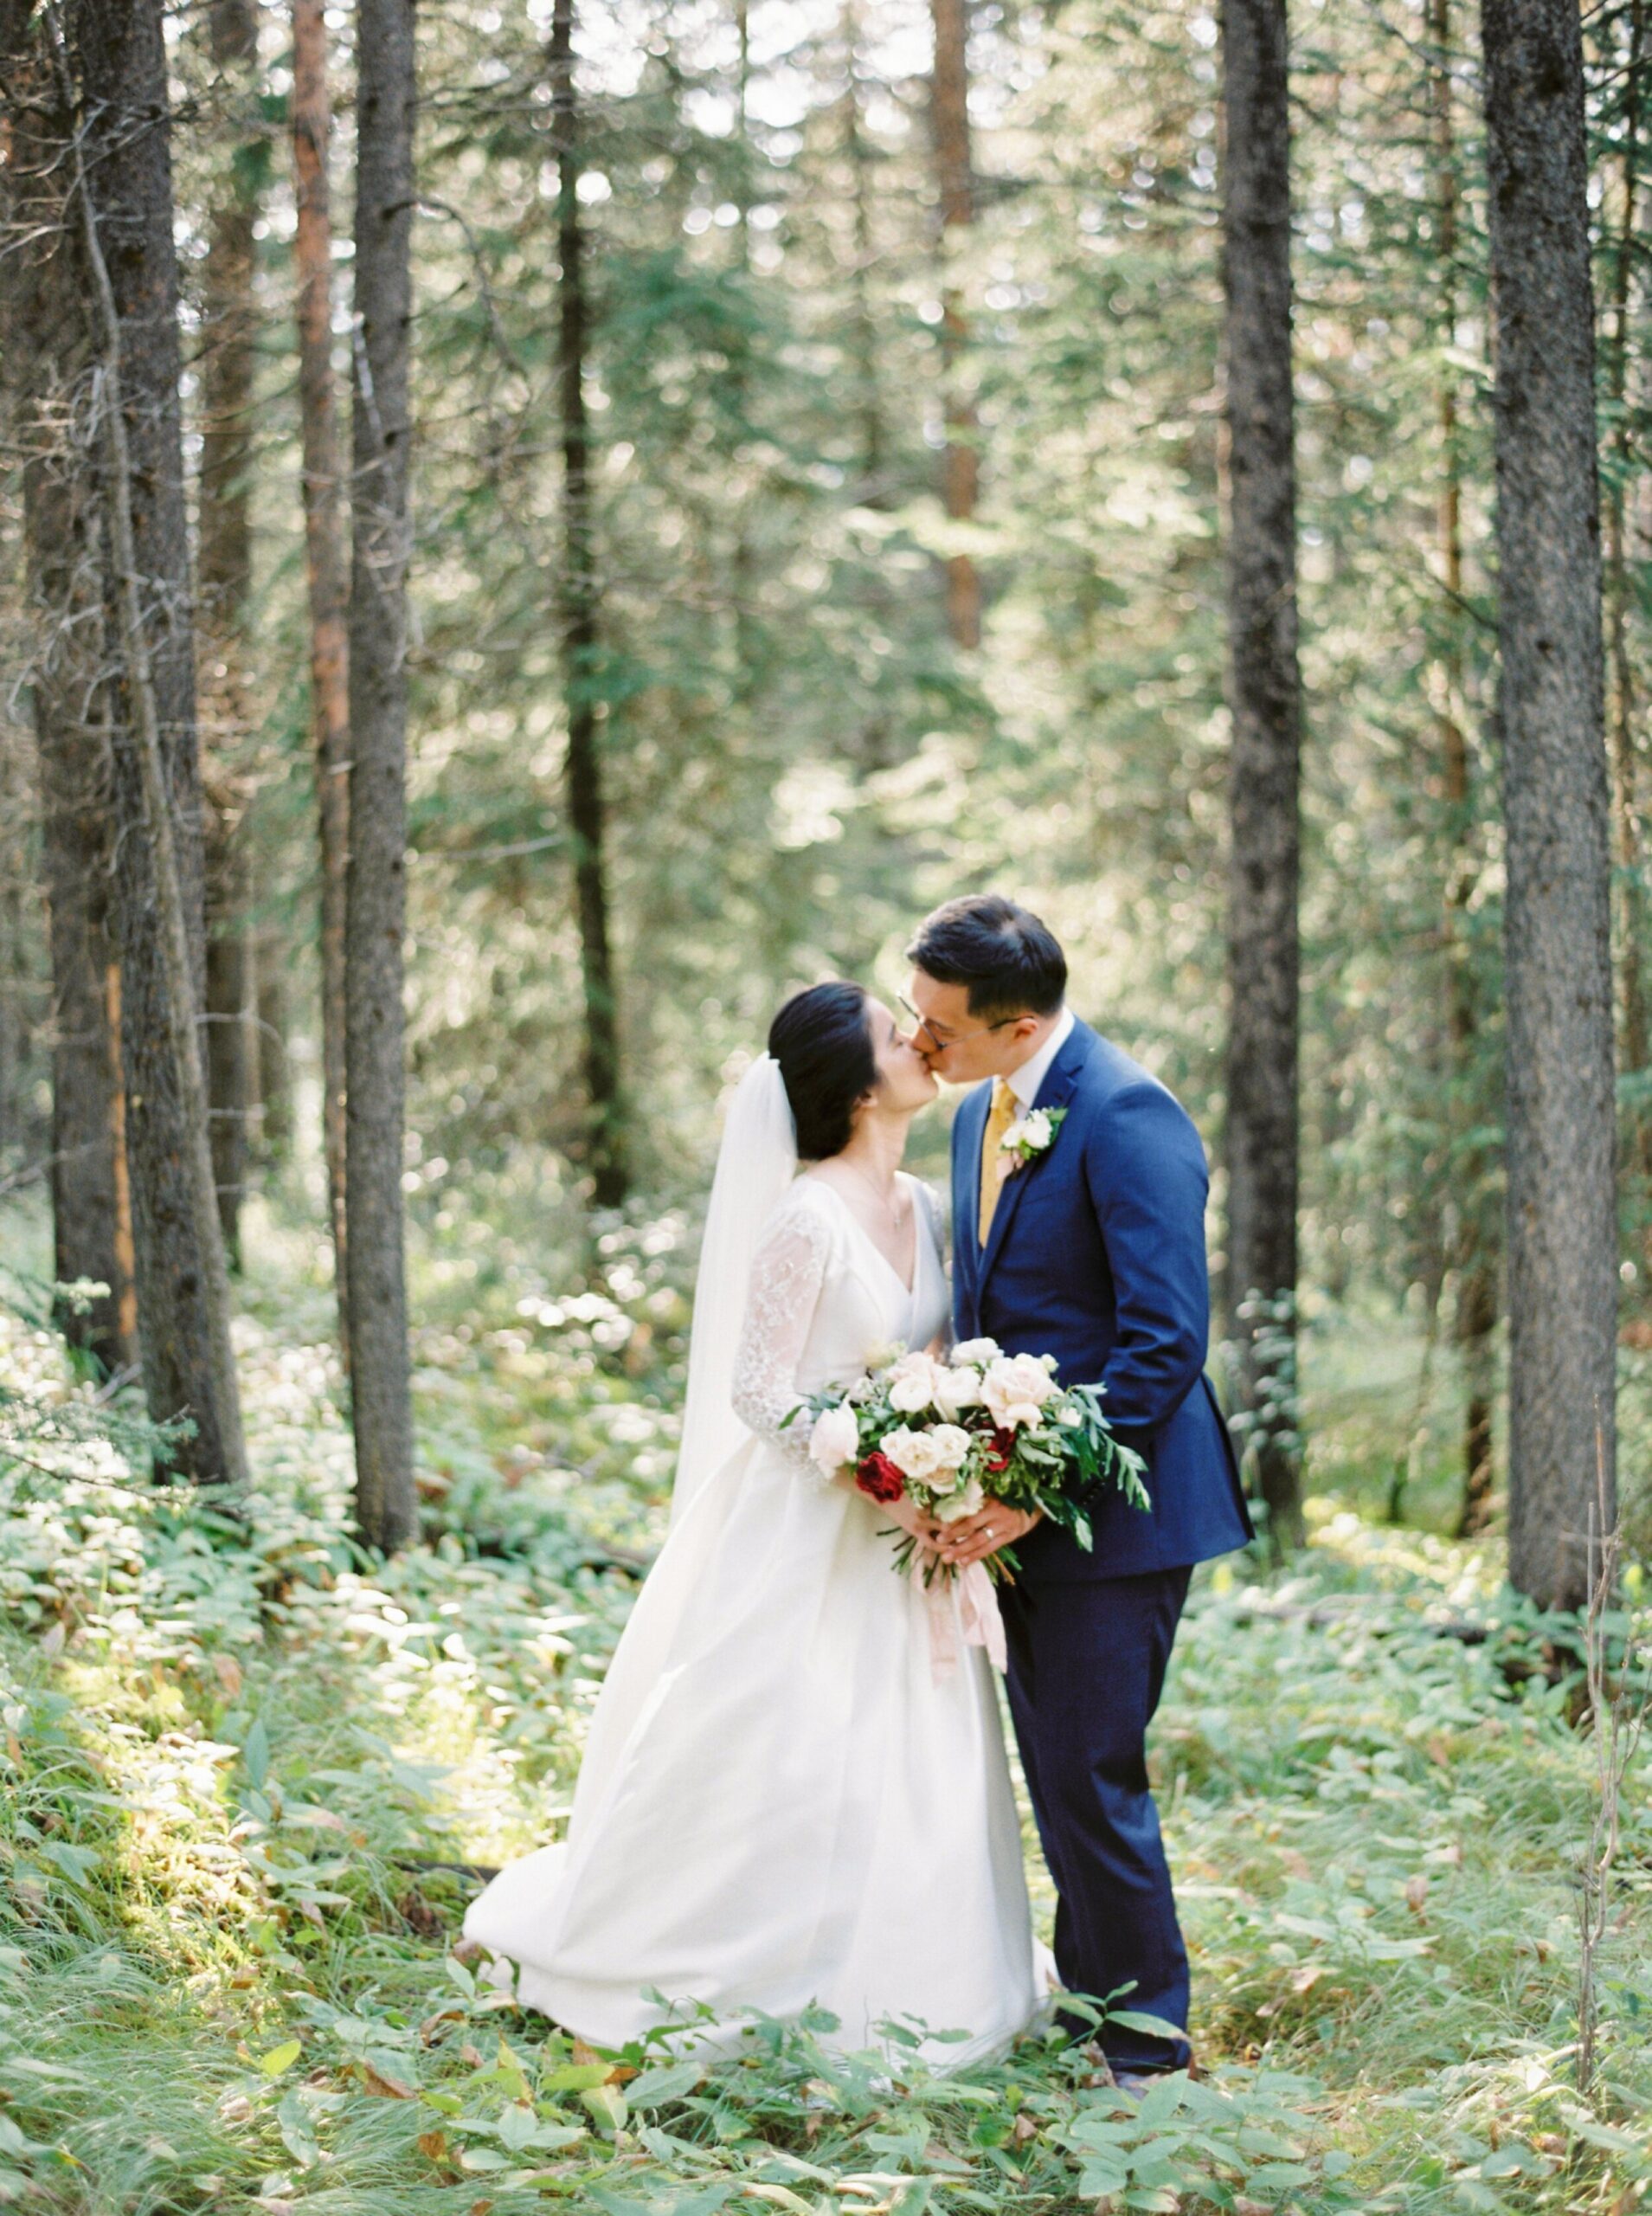  Forest mountain wedding portraits cathedral lace veil | Fairmont Banff Springs hotel wedding photographers | fine art film photography | portra 400 